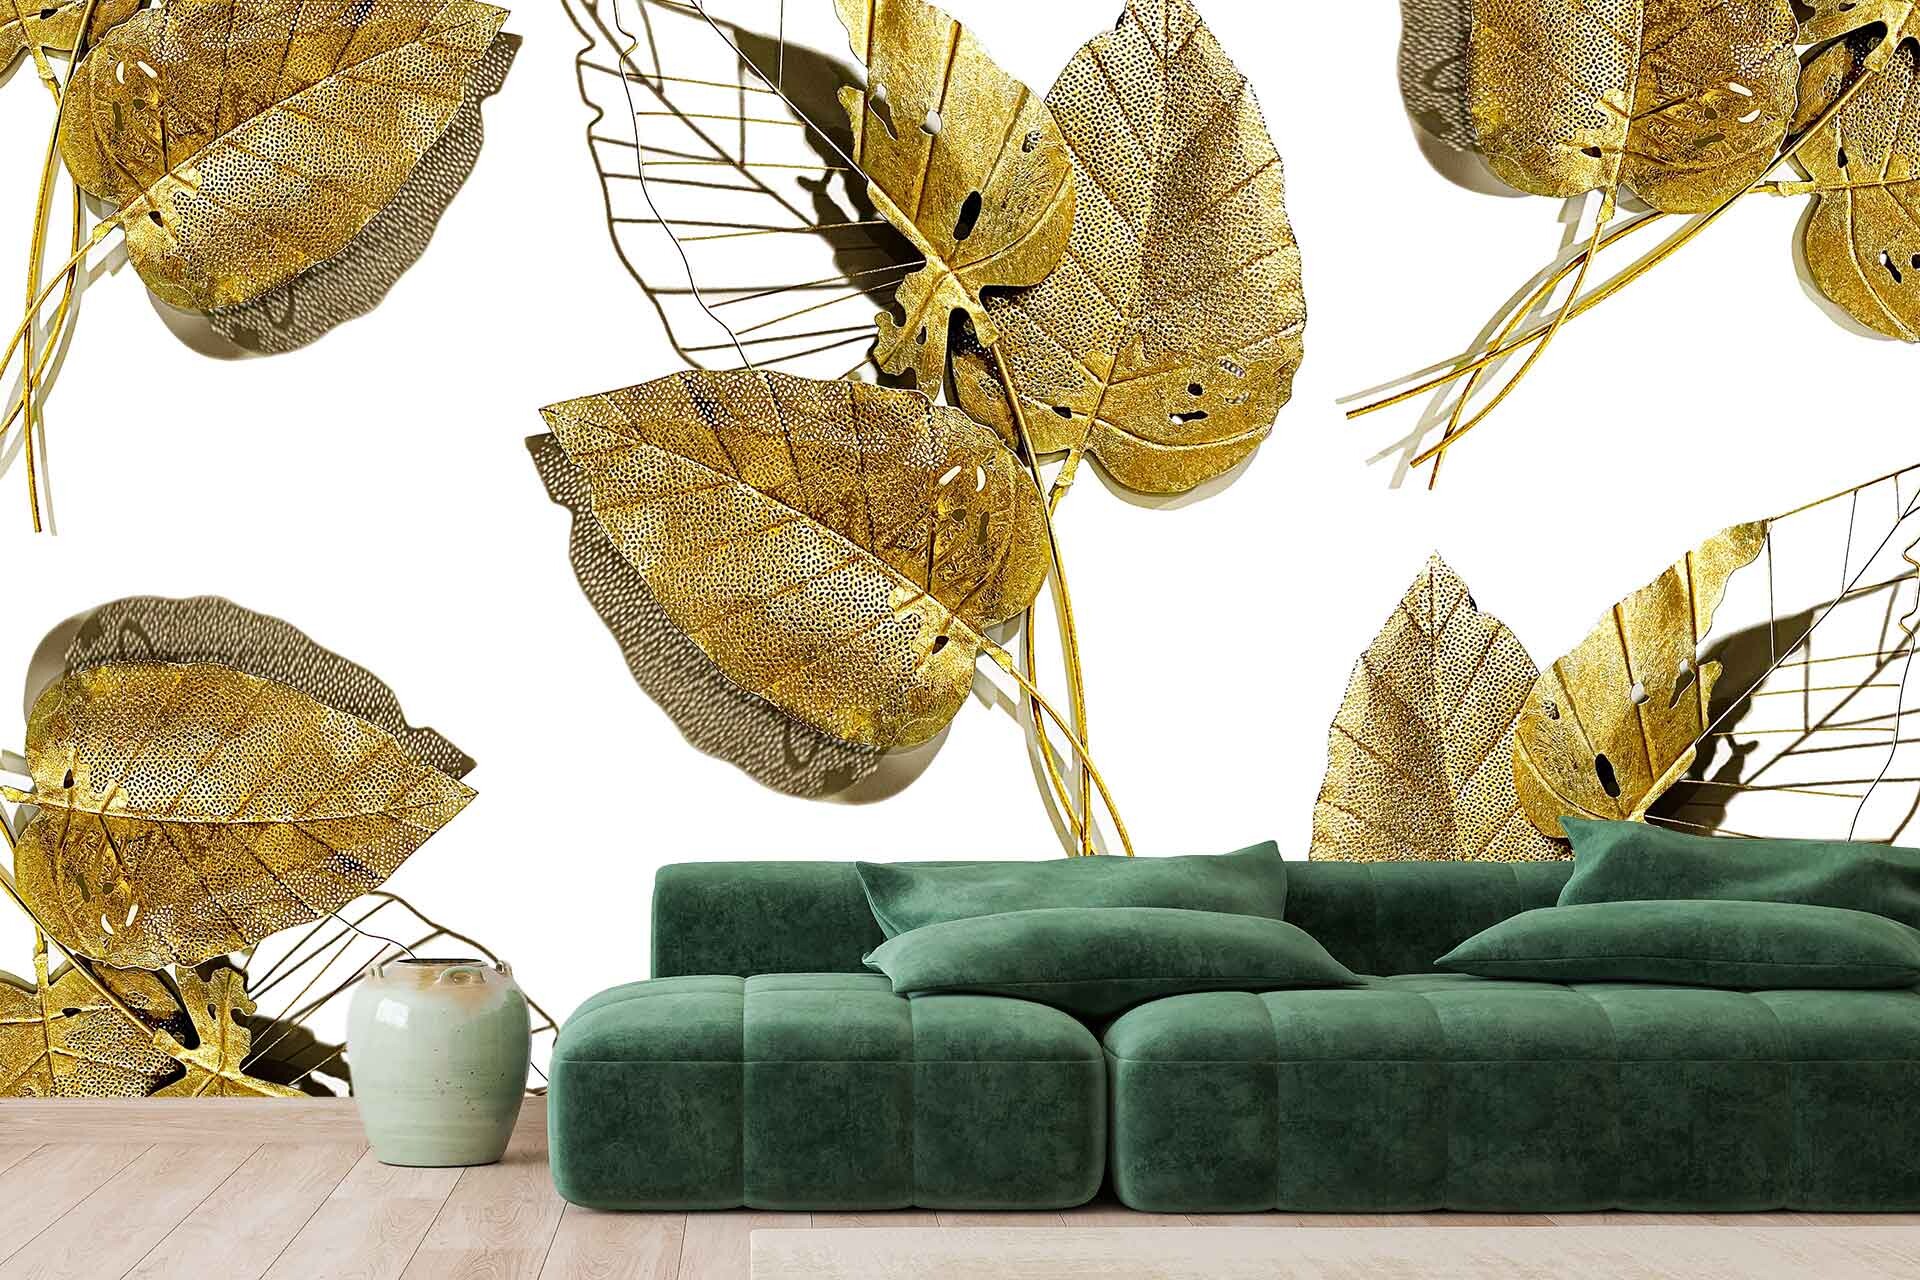 Gold Leaf: Golden plants for wall decoration, Skeleton leaves with the intricately laced veins. 1920x1280 HD Wallpaper.